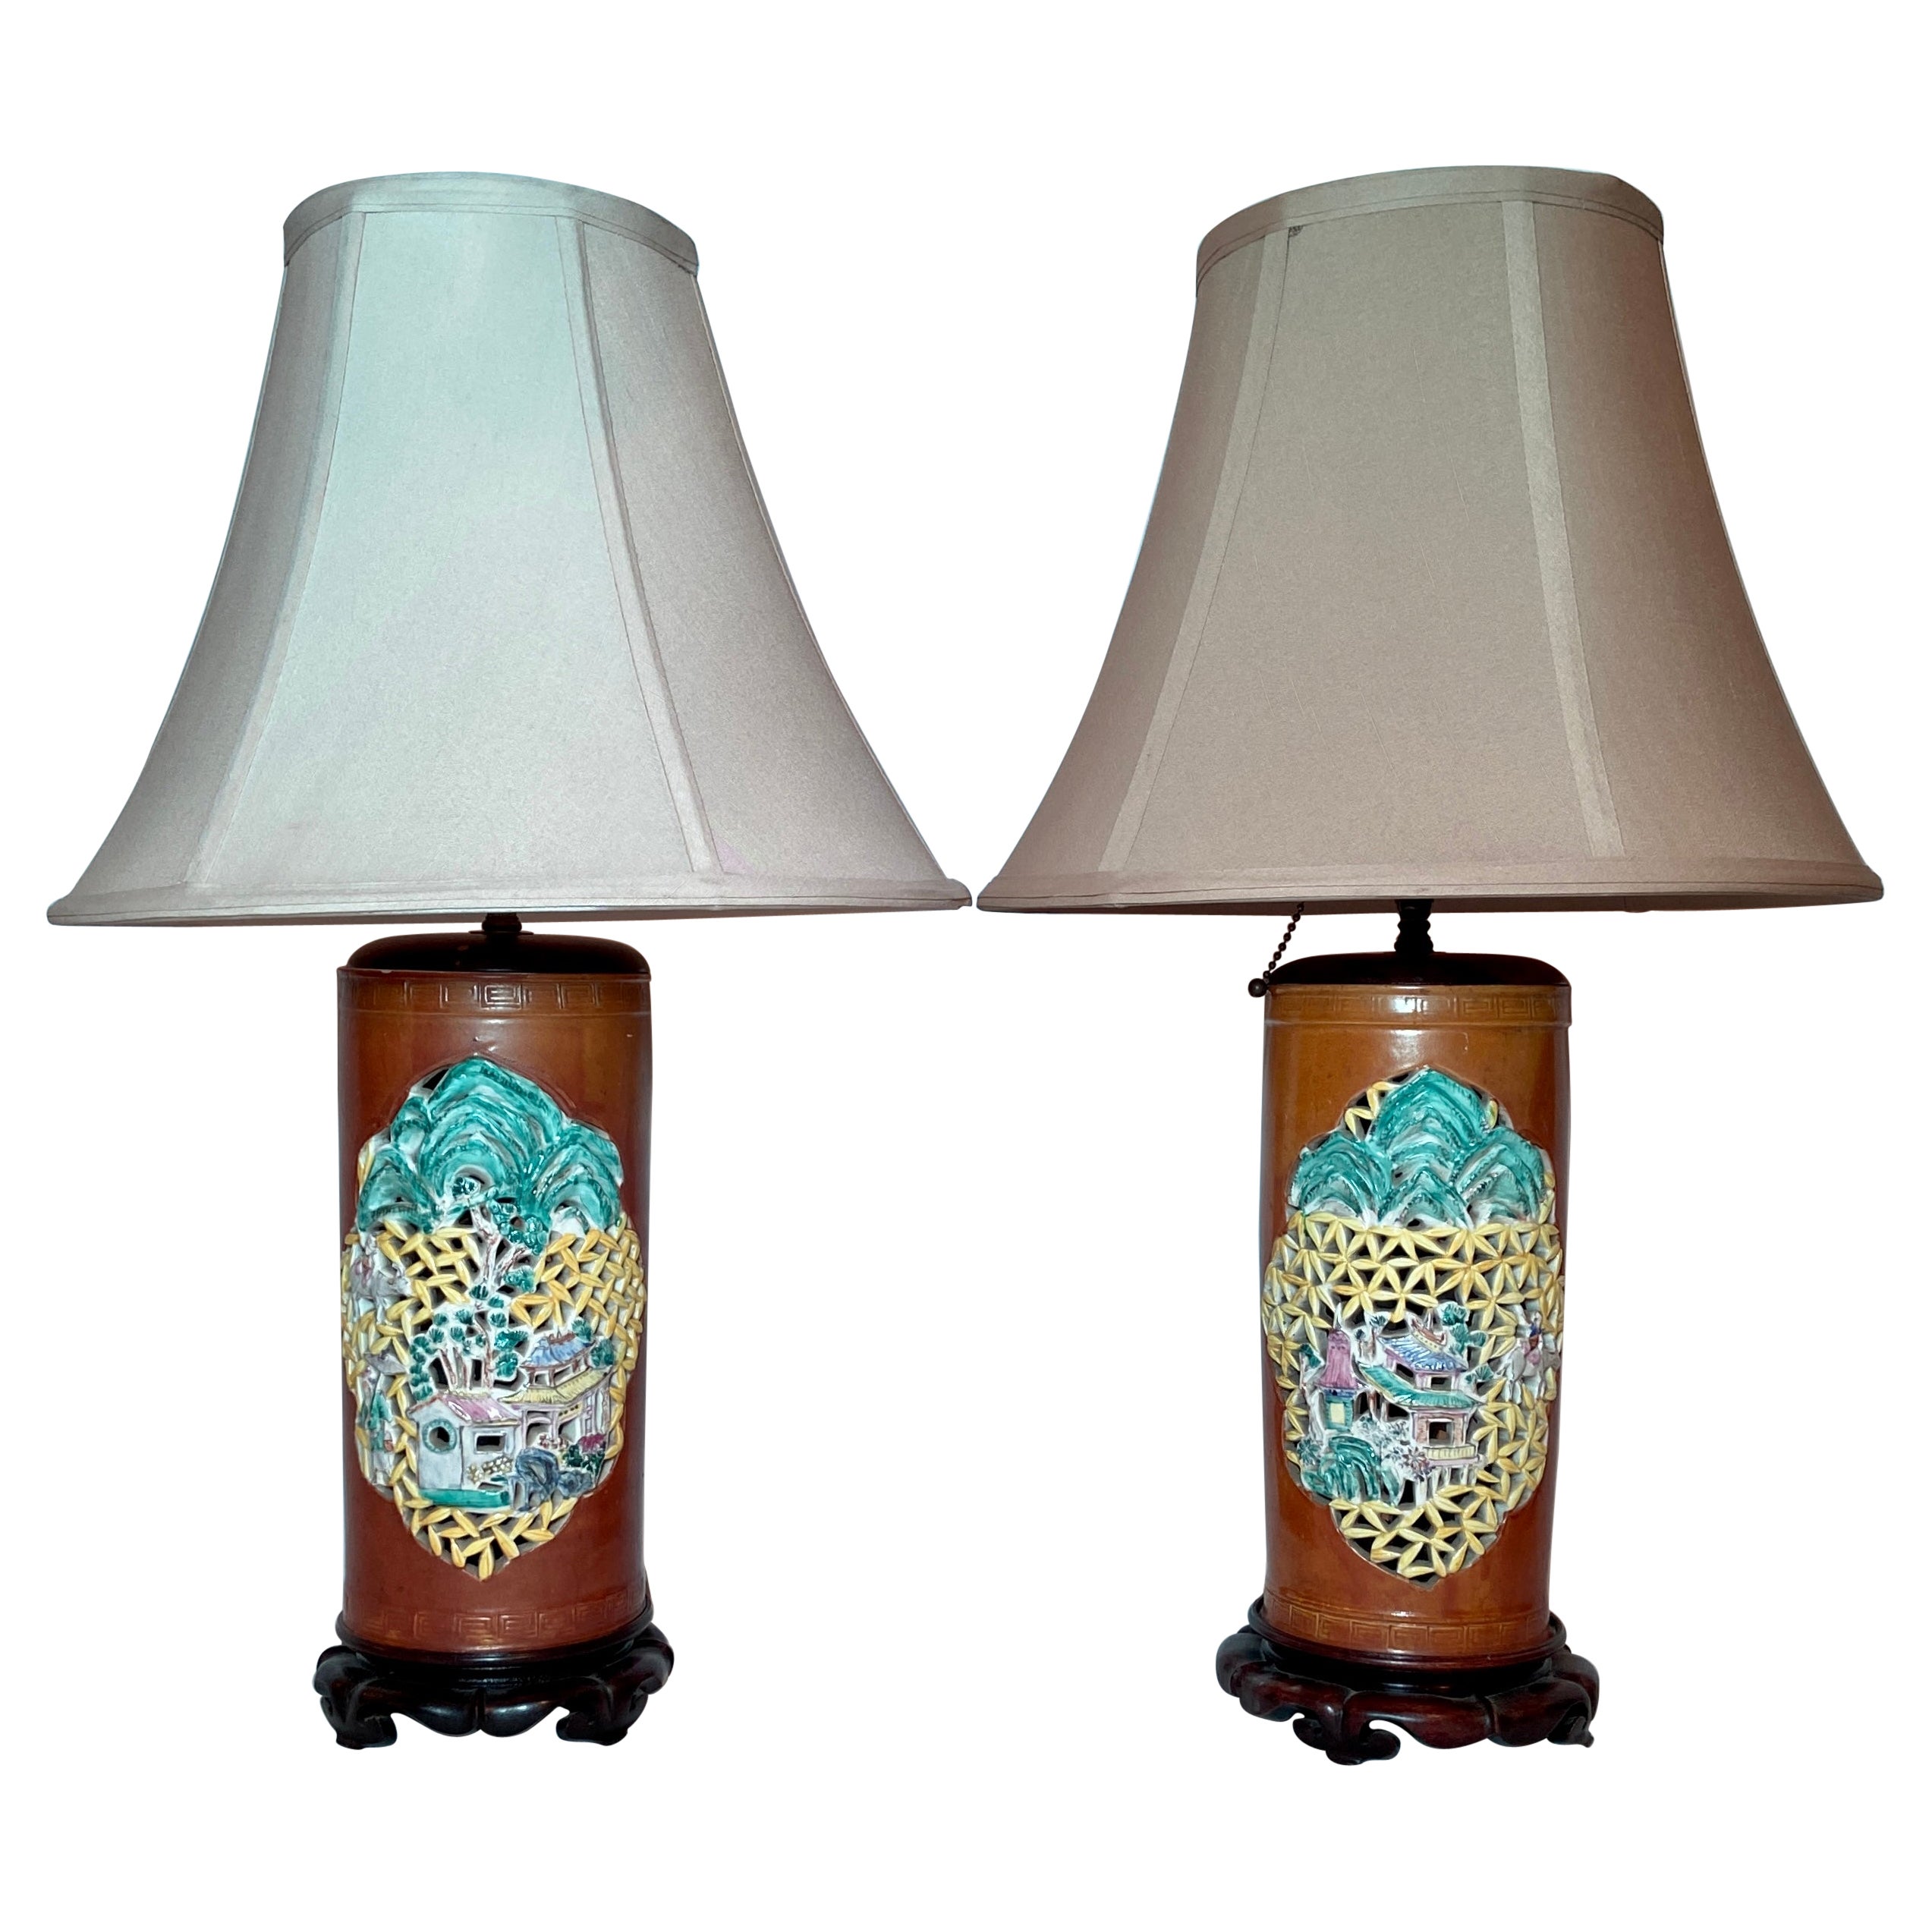 Pair Antique Chinese Porcelain Lanterns Made into Lamps, Circa 1890-1900 For Sale